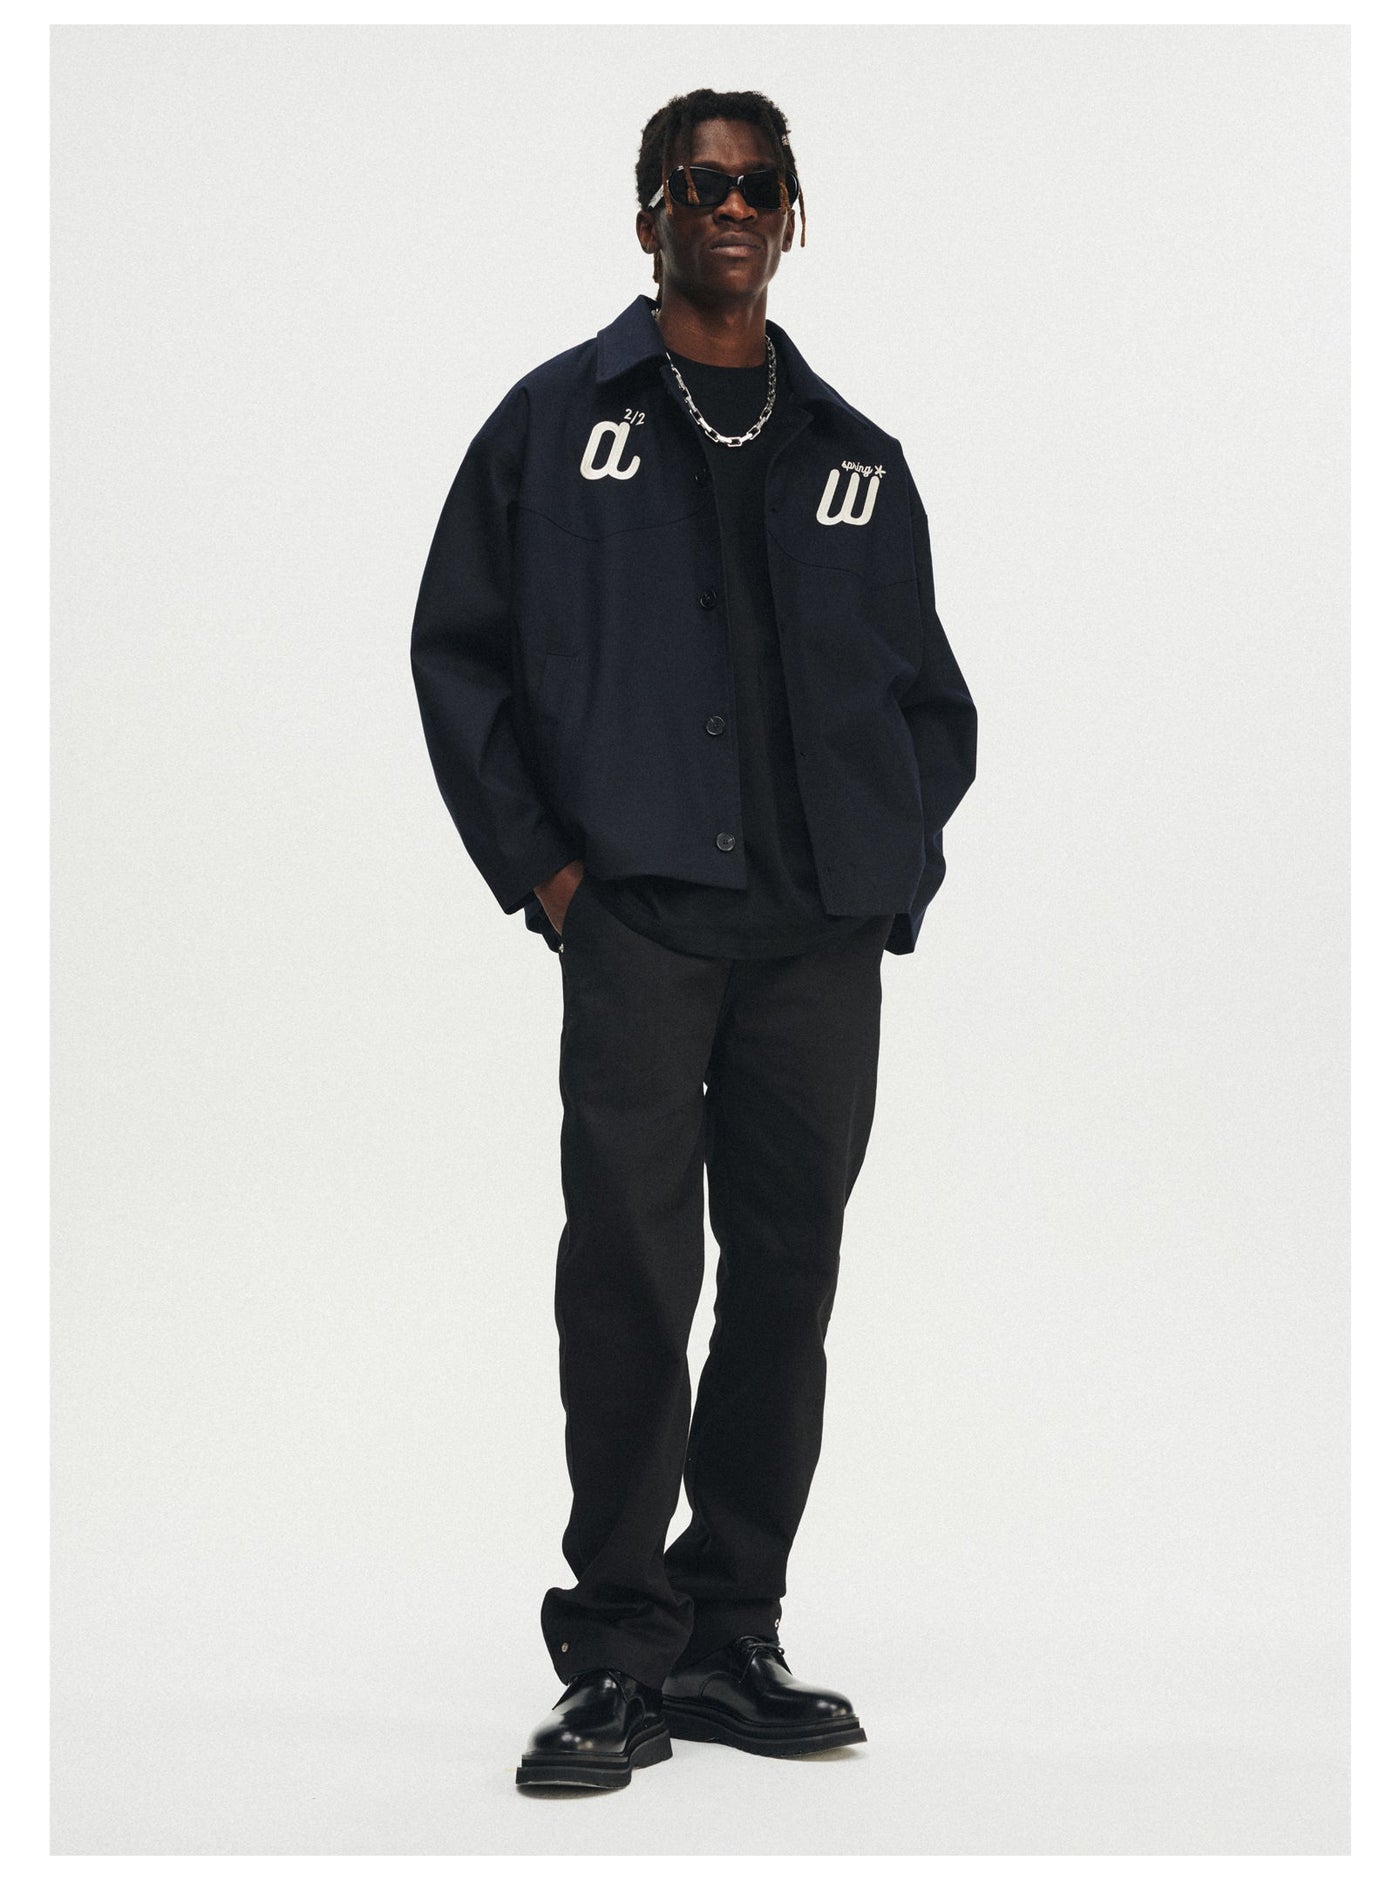 ANTIDOTE Letter Logo Embroidered Loose Jacket